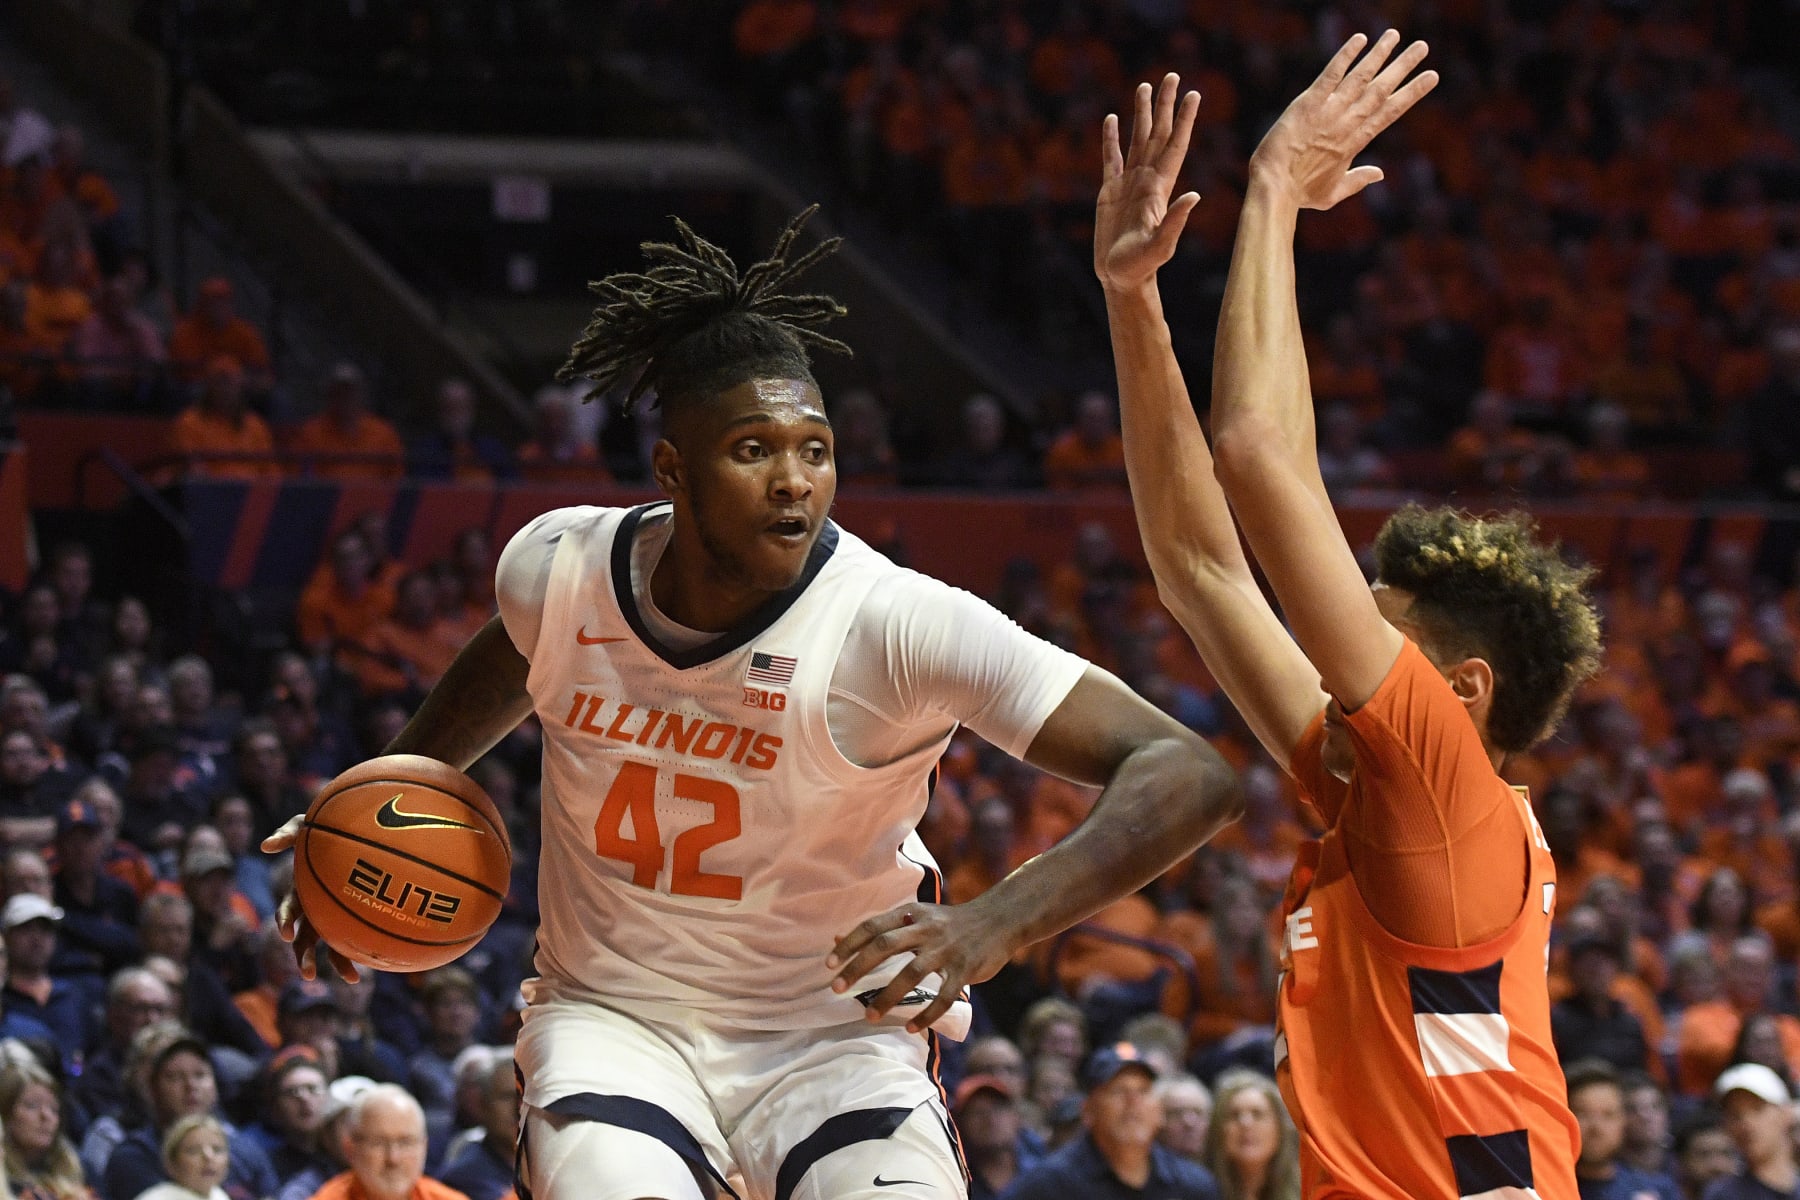 Clemson Basketball: Galloway signs NIL deal with an underwear company